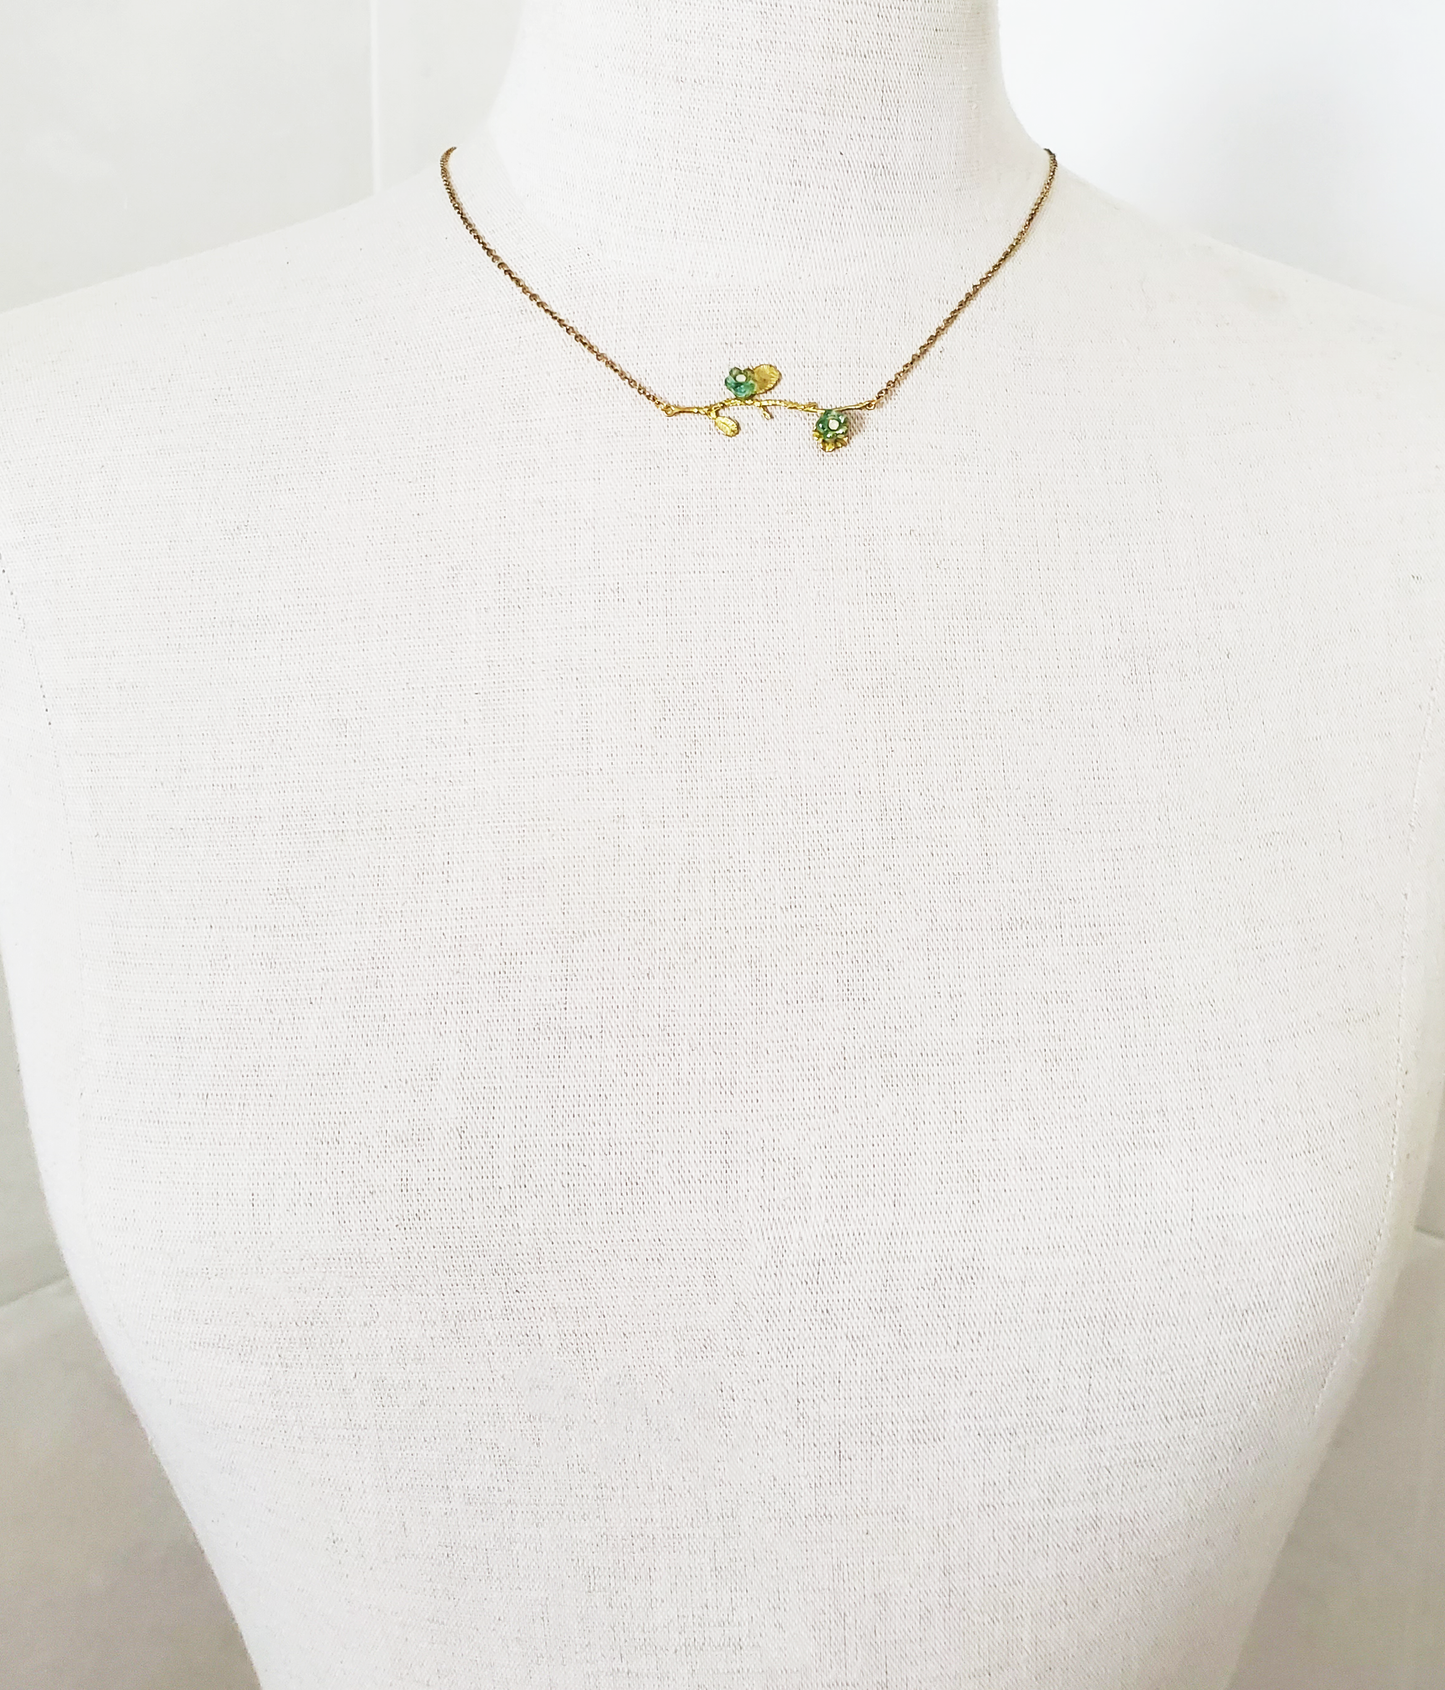 Branch and Green Flower Pendant Necklace